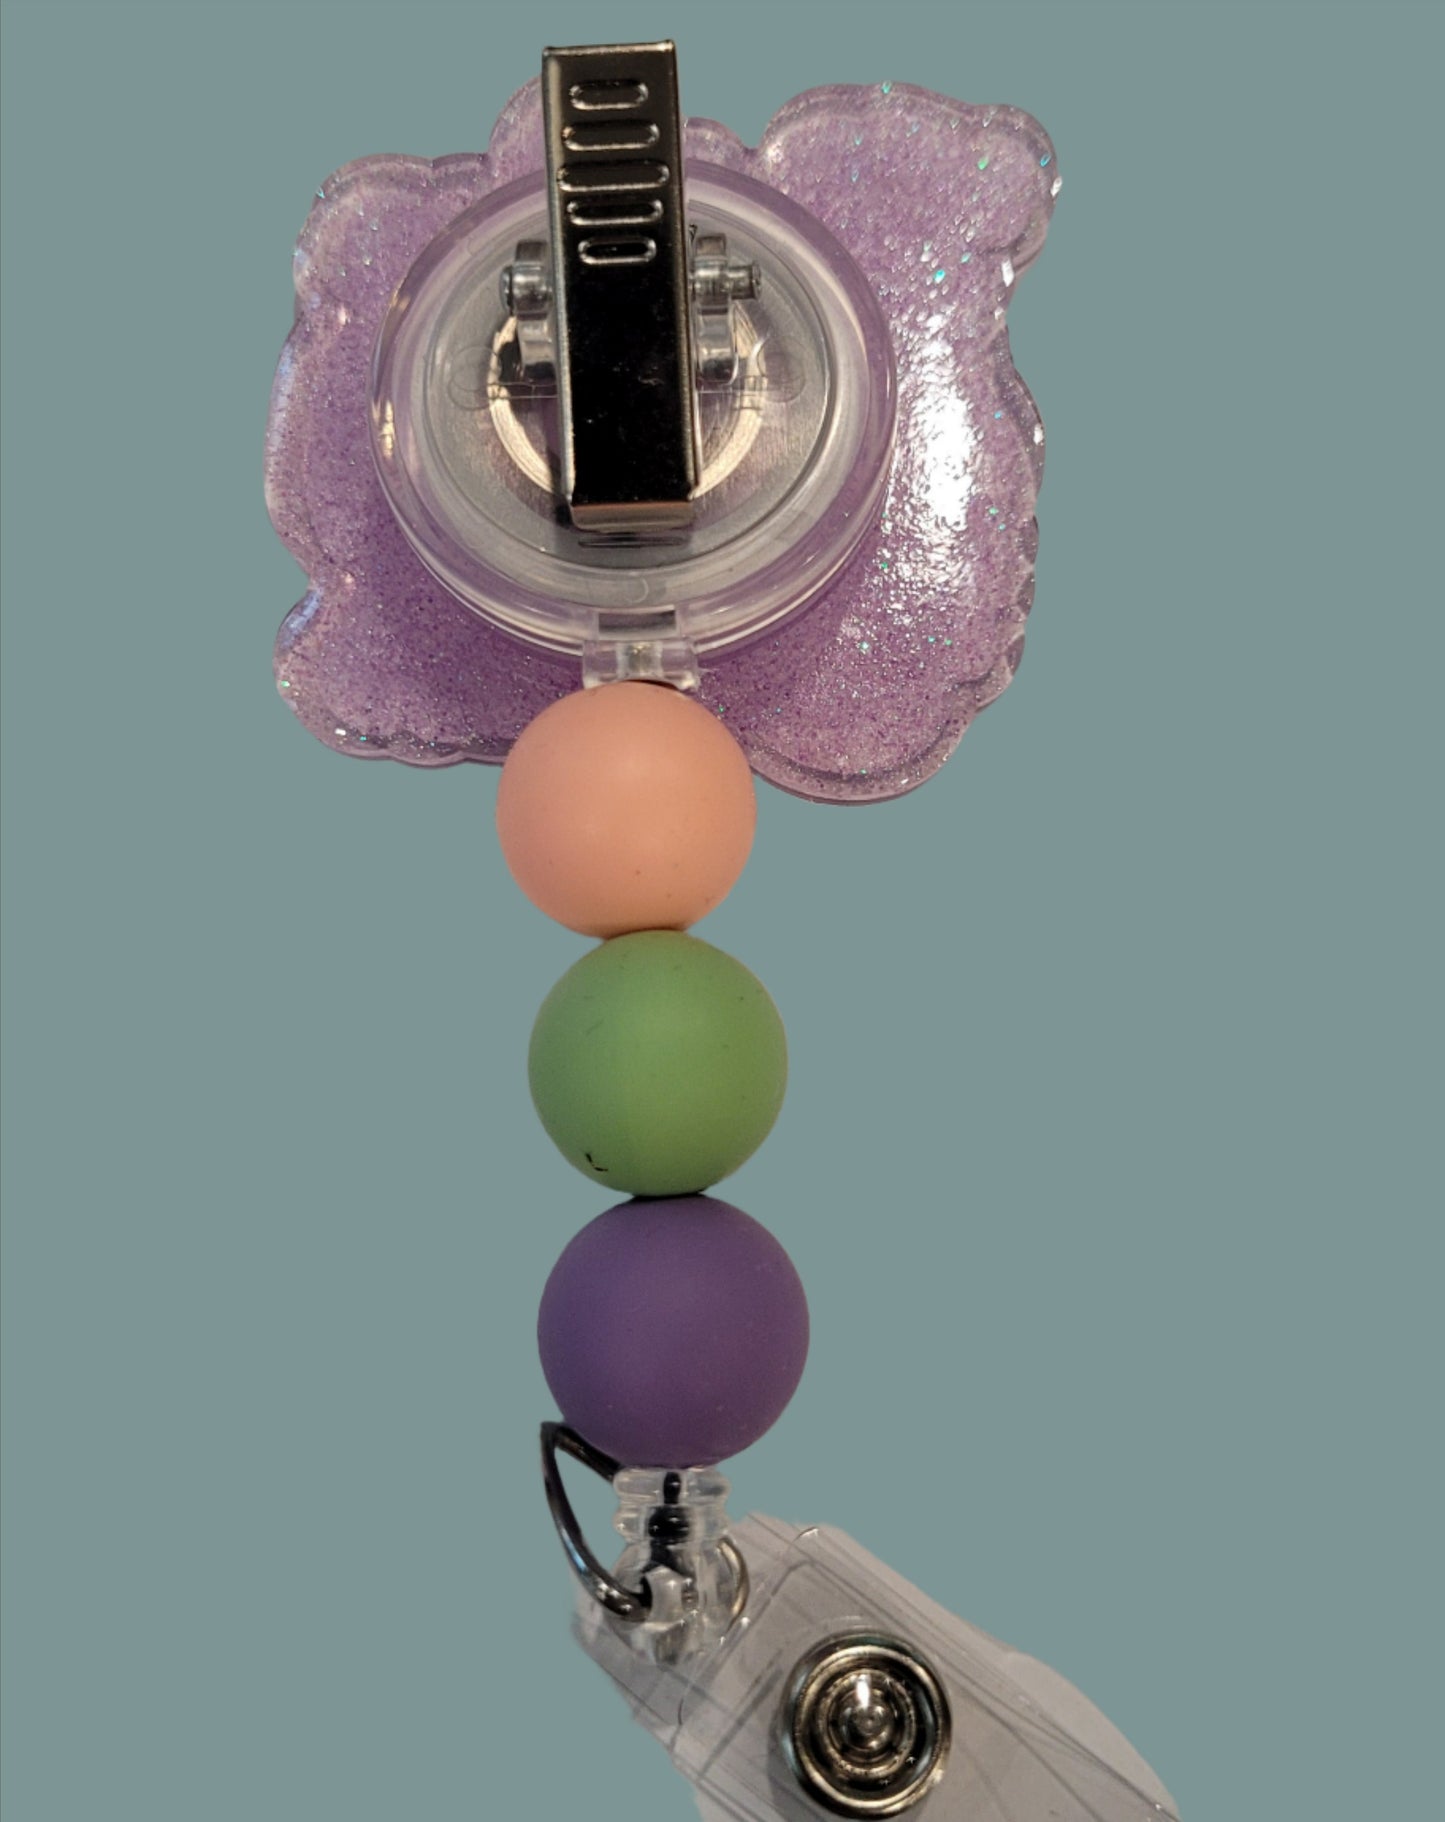 Ahhh the beach life. Here we have our acrylic badge reel stating No One Likes a Shady Beach. But what if we were located on a beach???? Quite the Paradox. This badge reel has a light purple glitter back and 3 silicone color coordinated beads to finish the look.